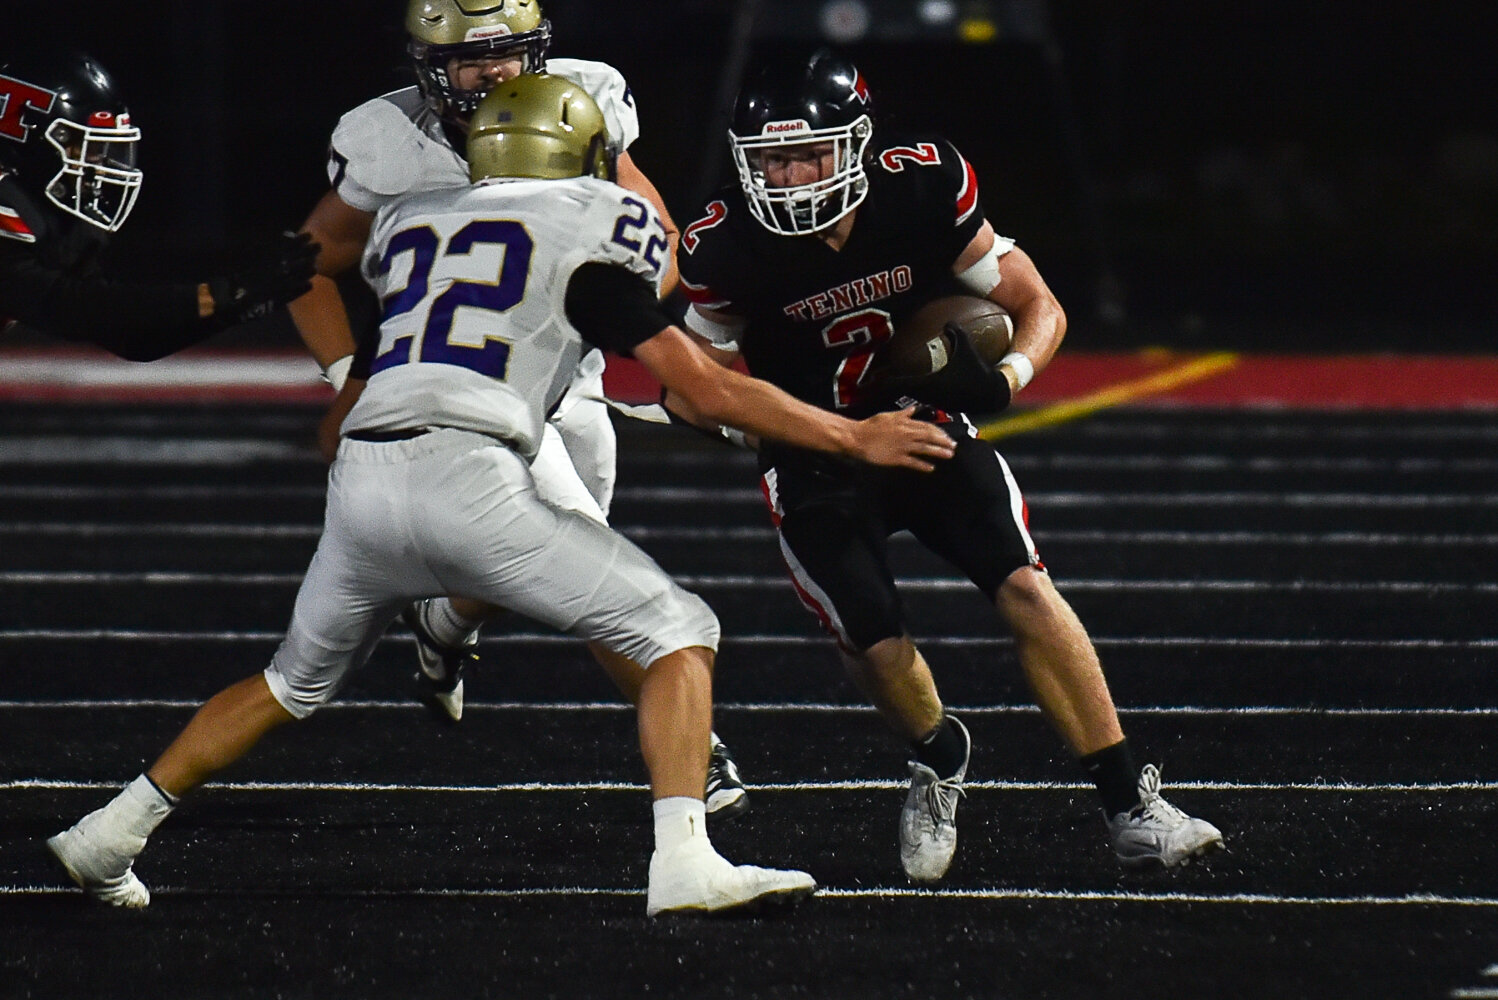 Tenino's Austin Gonia looks to run through an Ony defender in their 62-21 loss on Sept. 22.